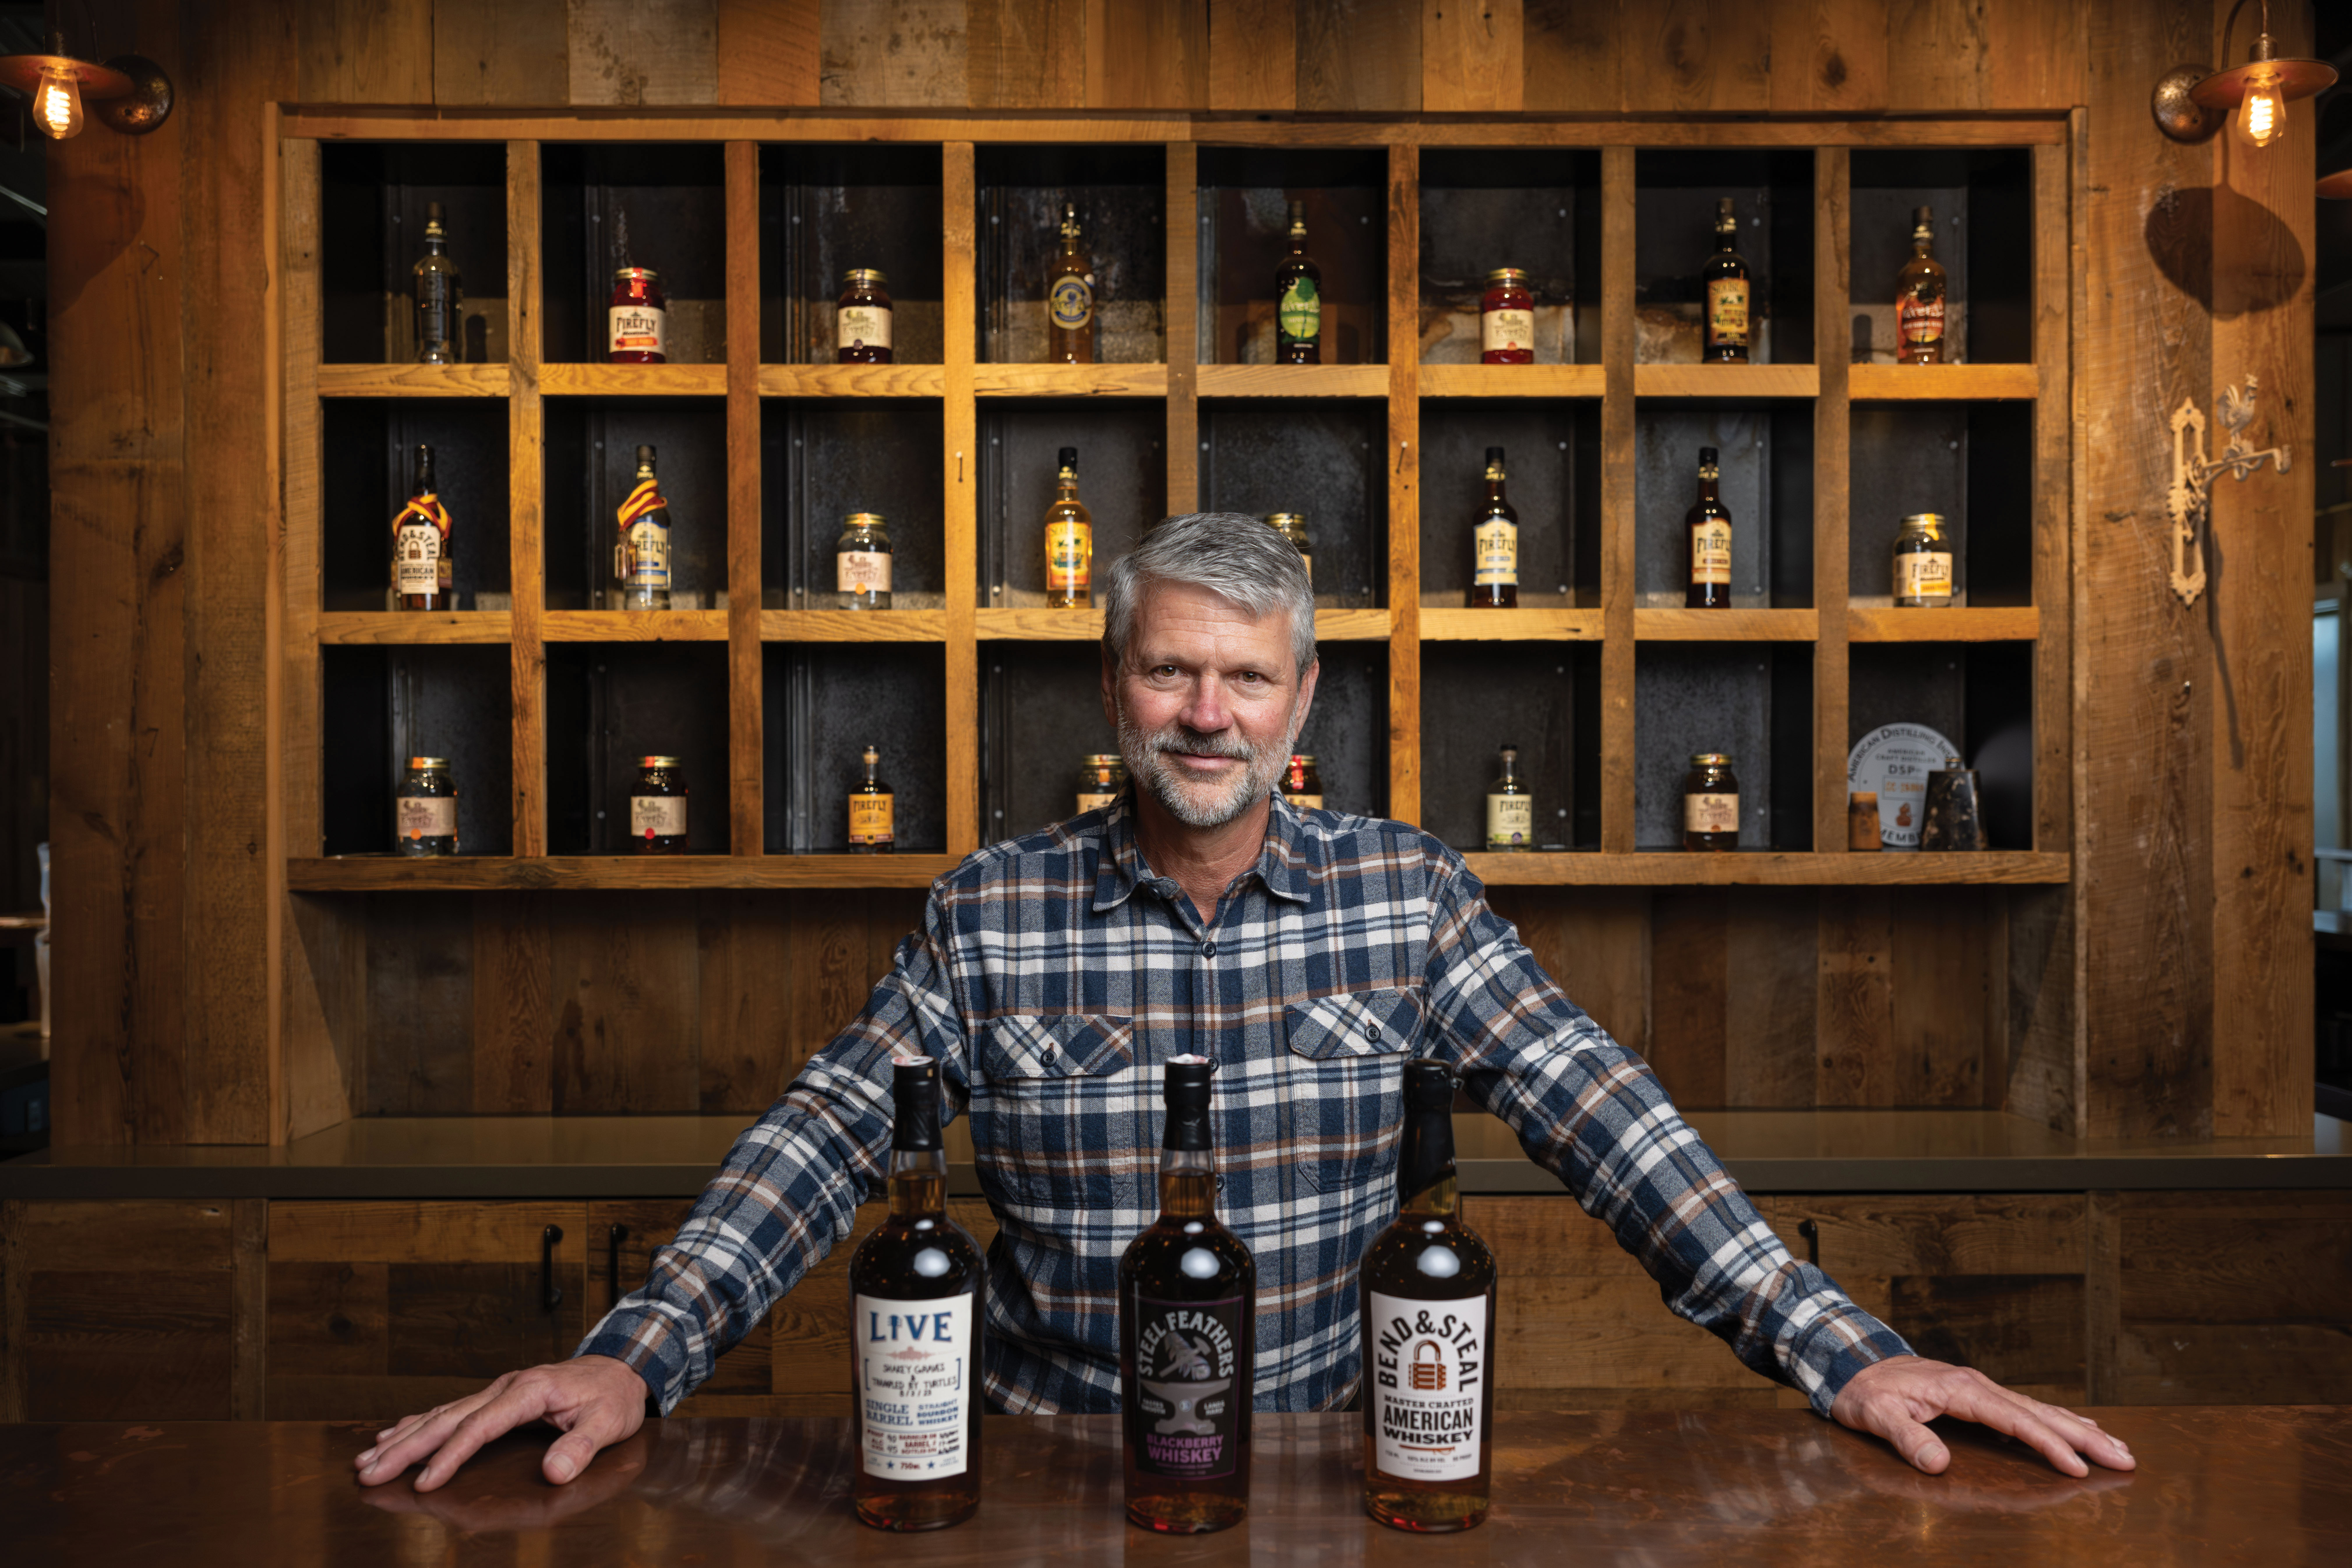 Blazing a Trail: Scott Newitt founded Firefly Distillery with his business partner Jim Irvin in 2005. By lobbying the legislature to lower prohibitive fees, they paved the way for the spirits industry in Charleston and the state.